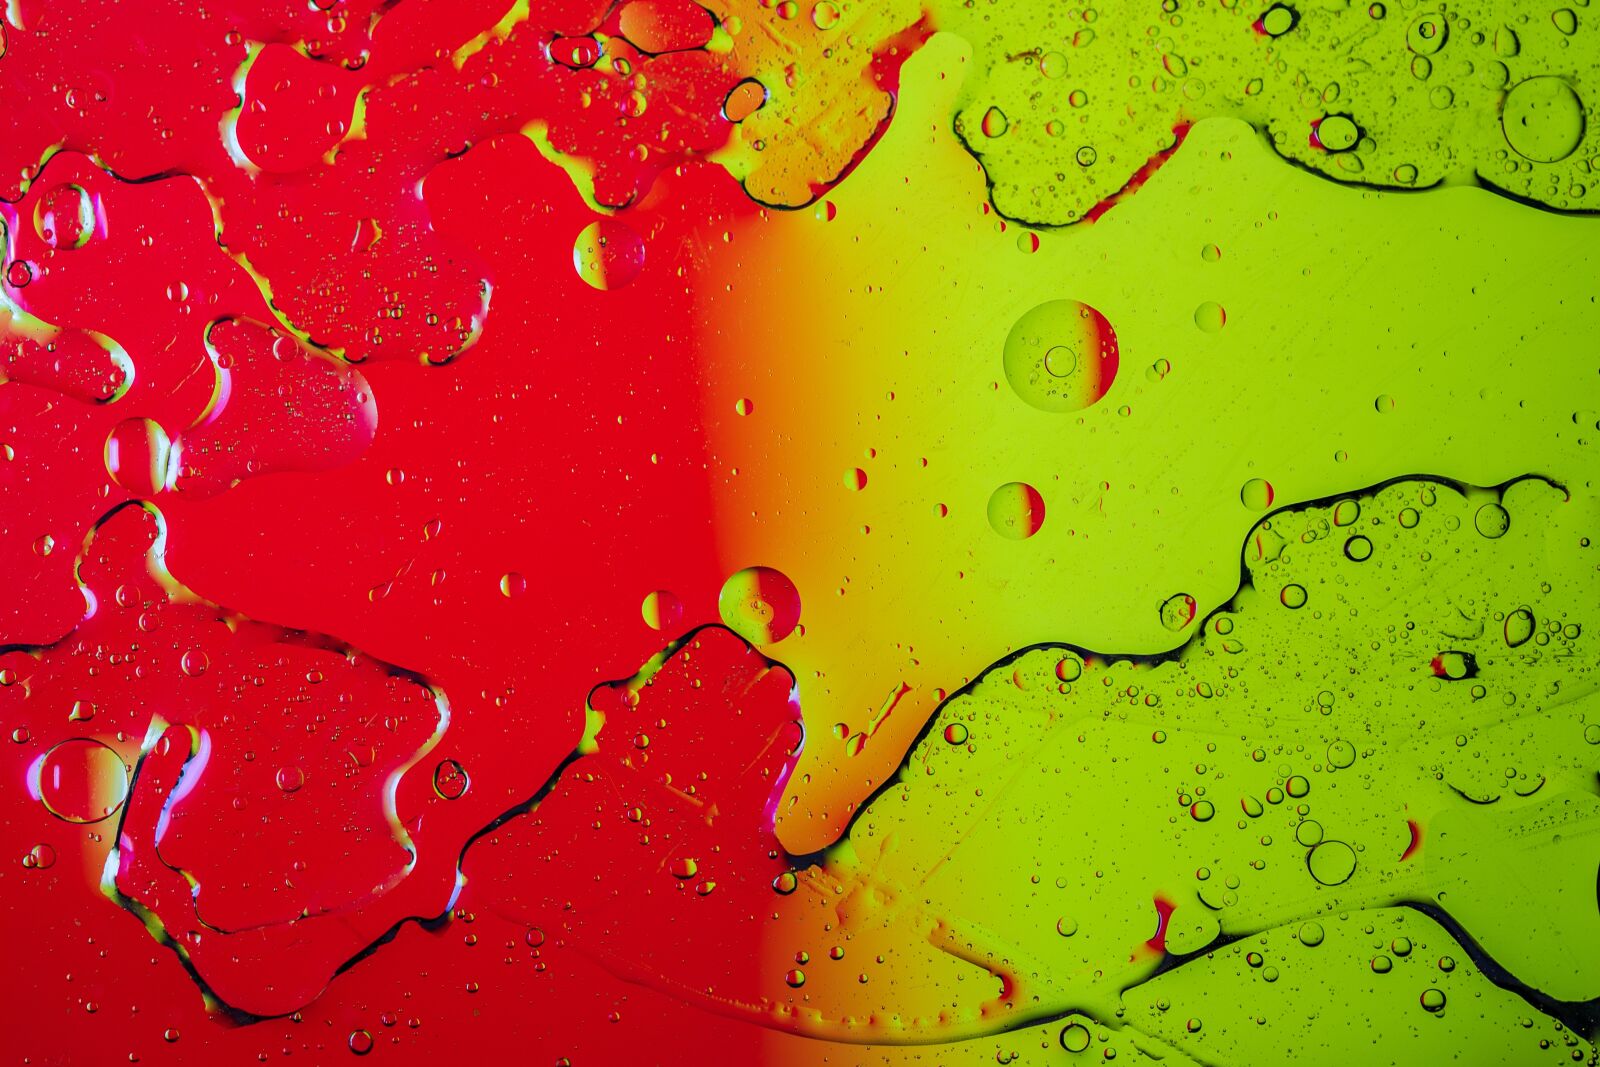 Sigma 70mm F2.8 DG Macro Art sample photo. Water, oil, colorful photography